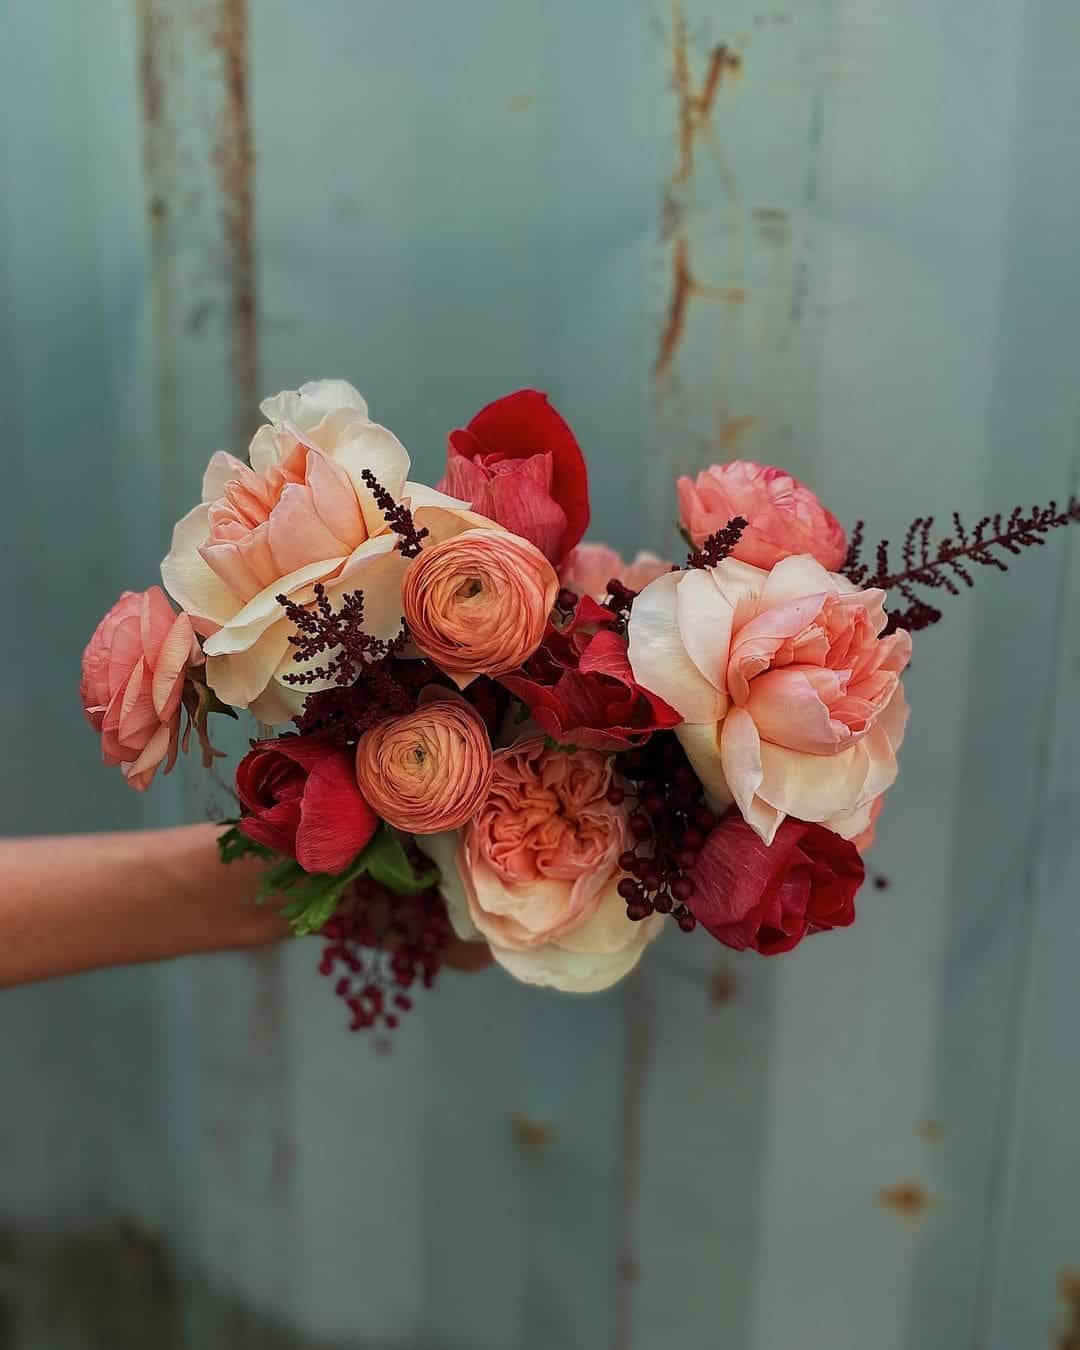 4 Tips for hiring your florist